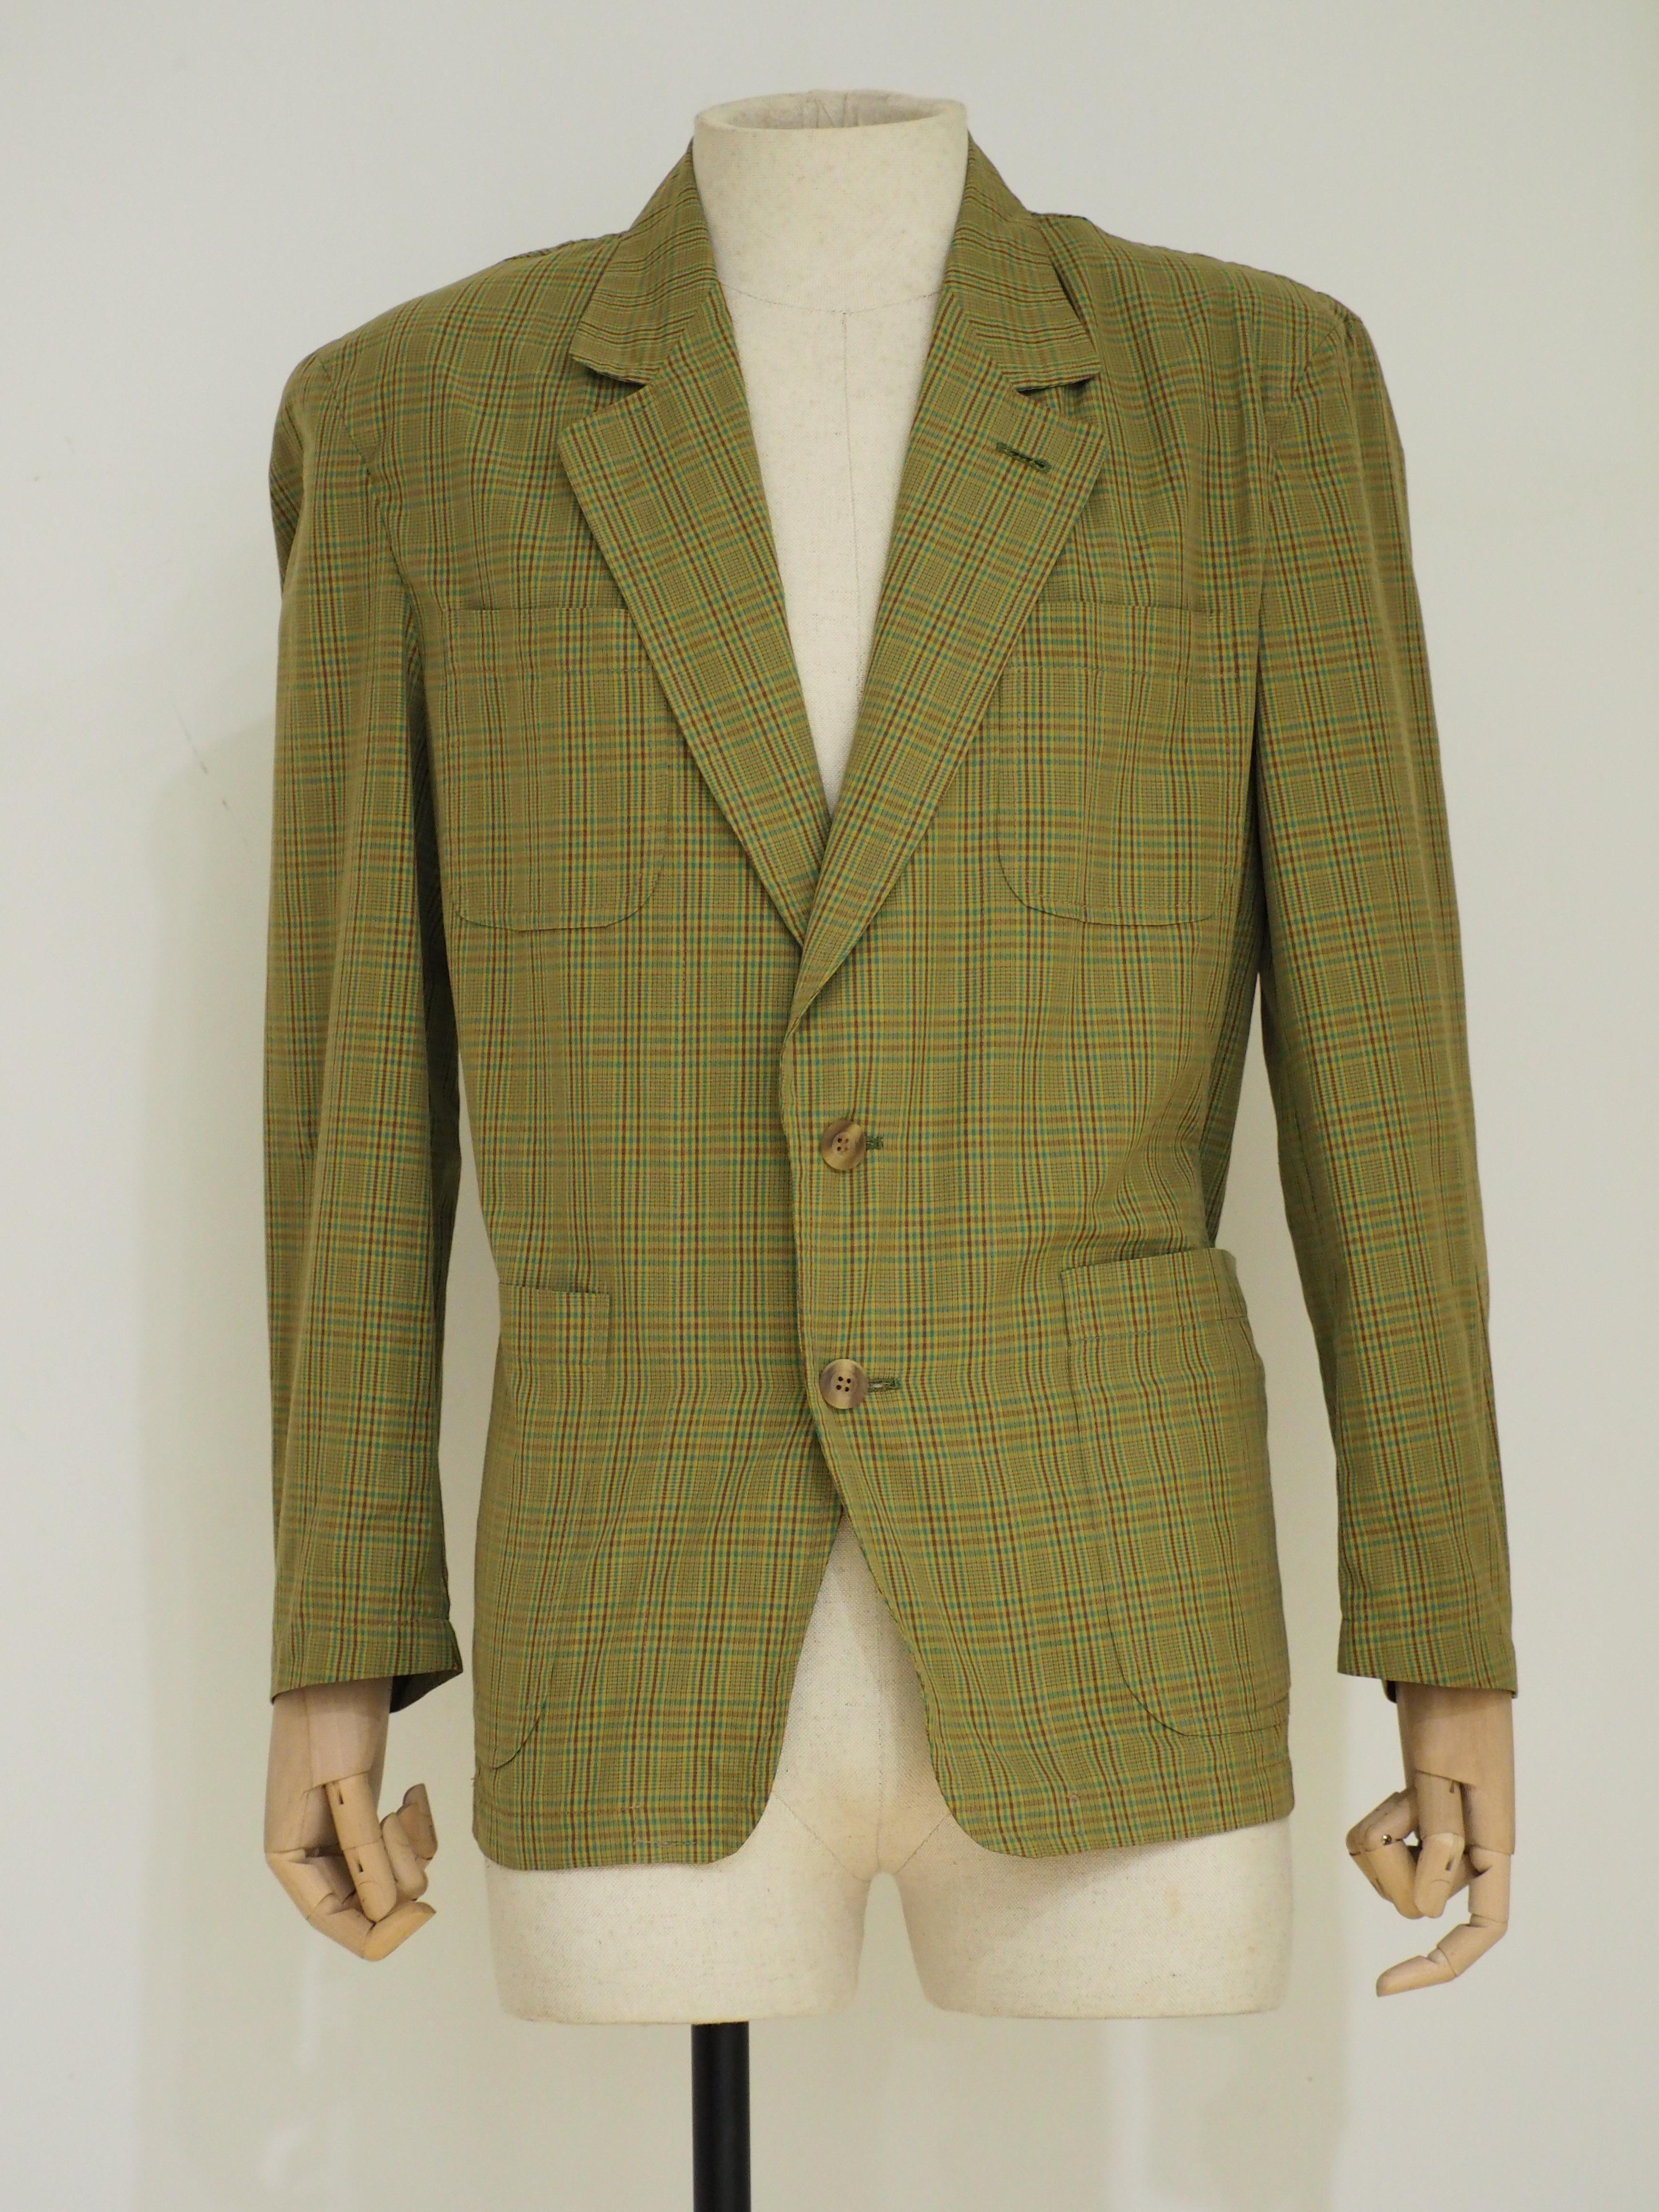 Example by Missoni Cotton Jacket
totally made in italy
Size 48
